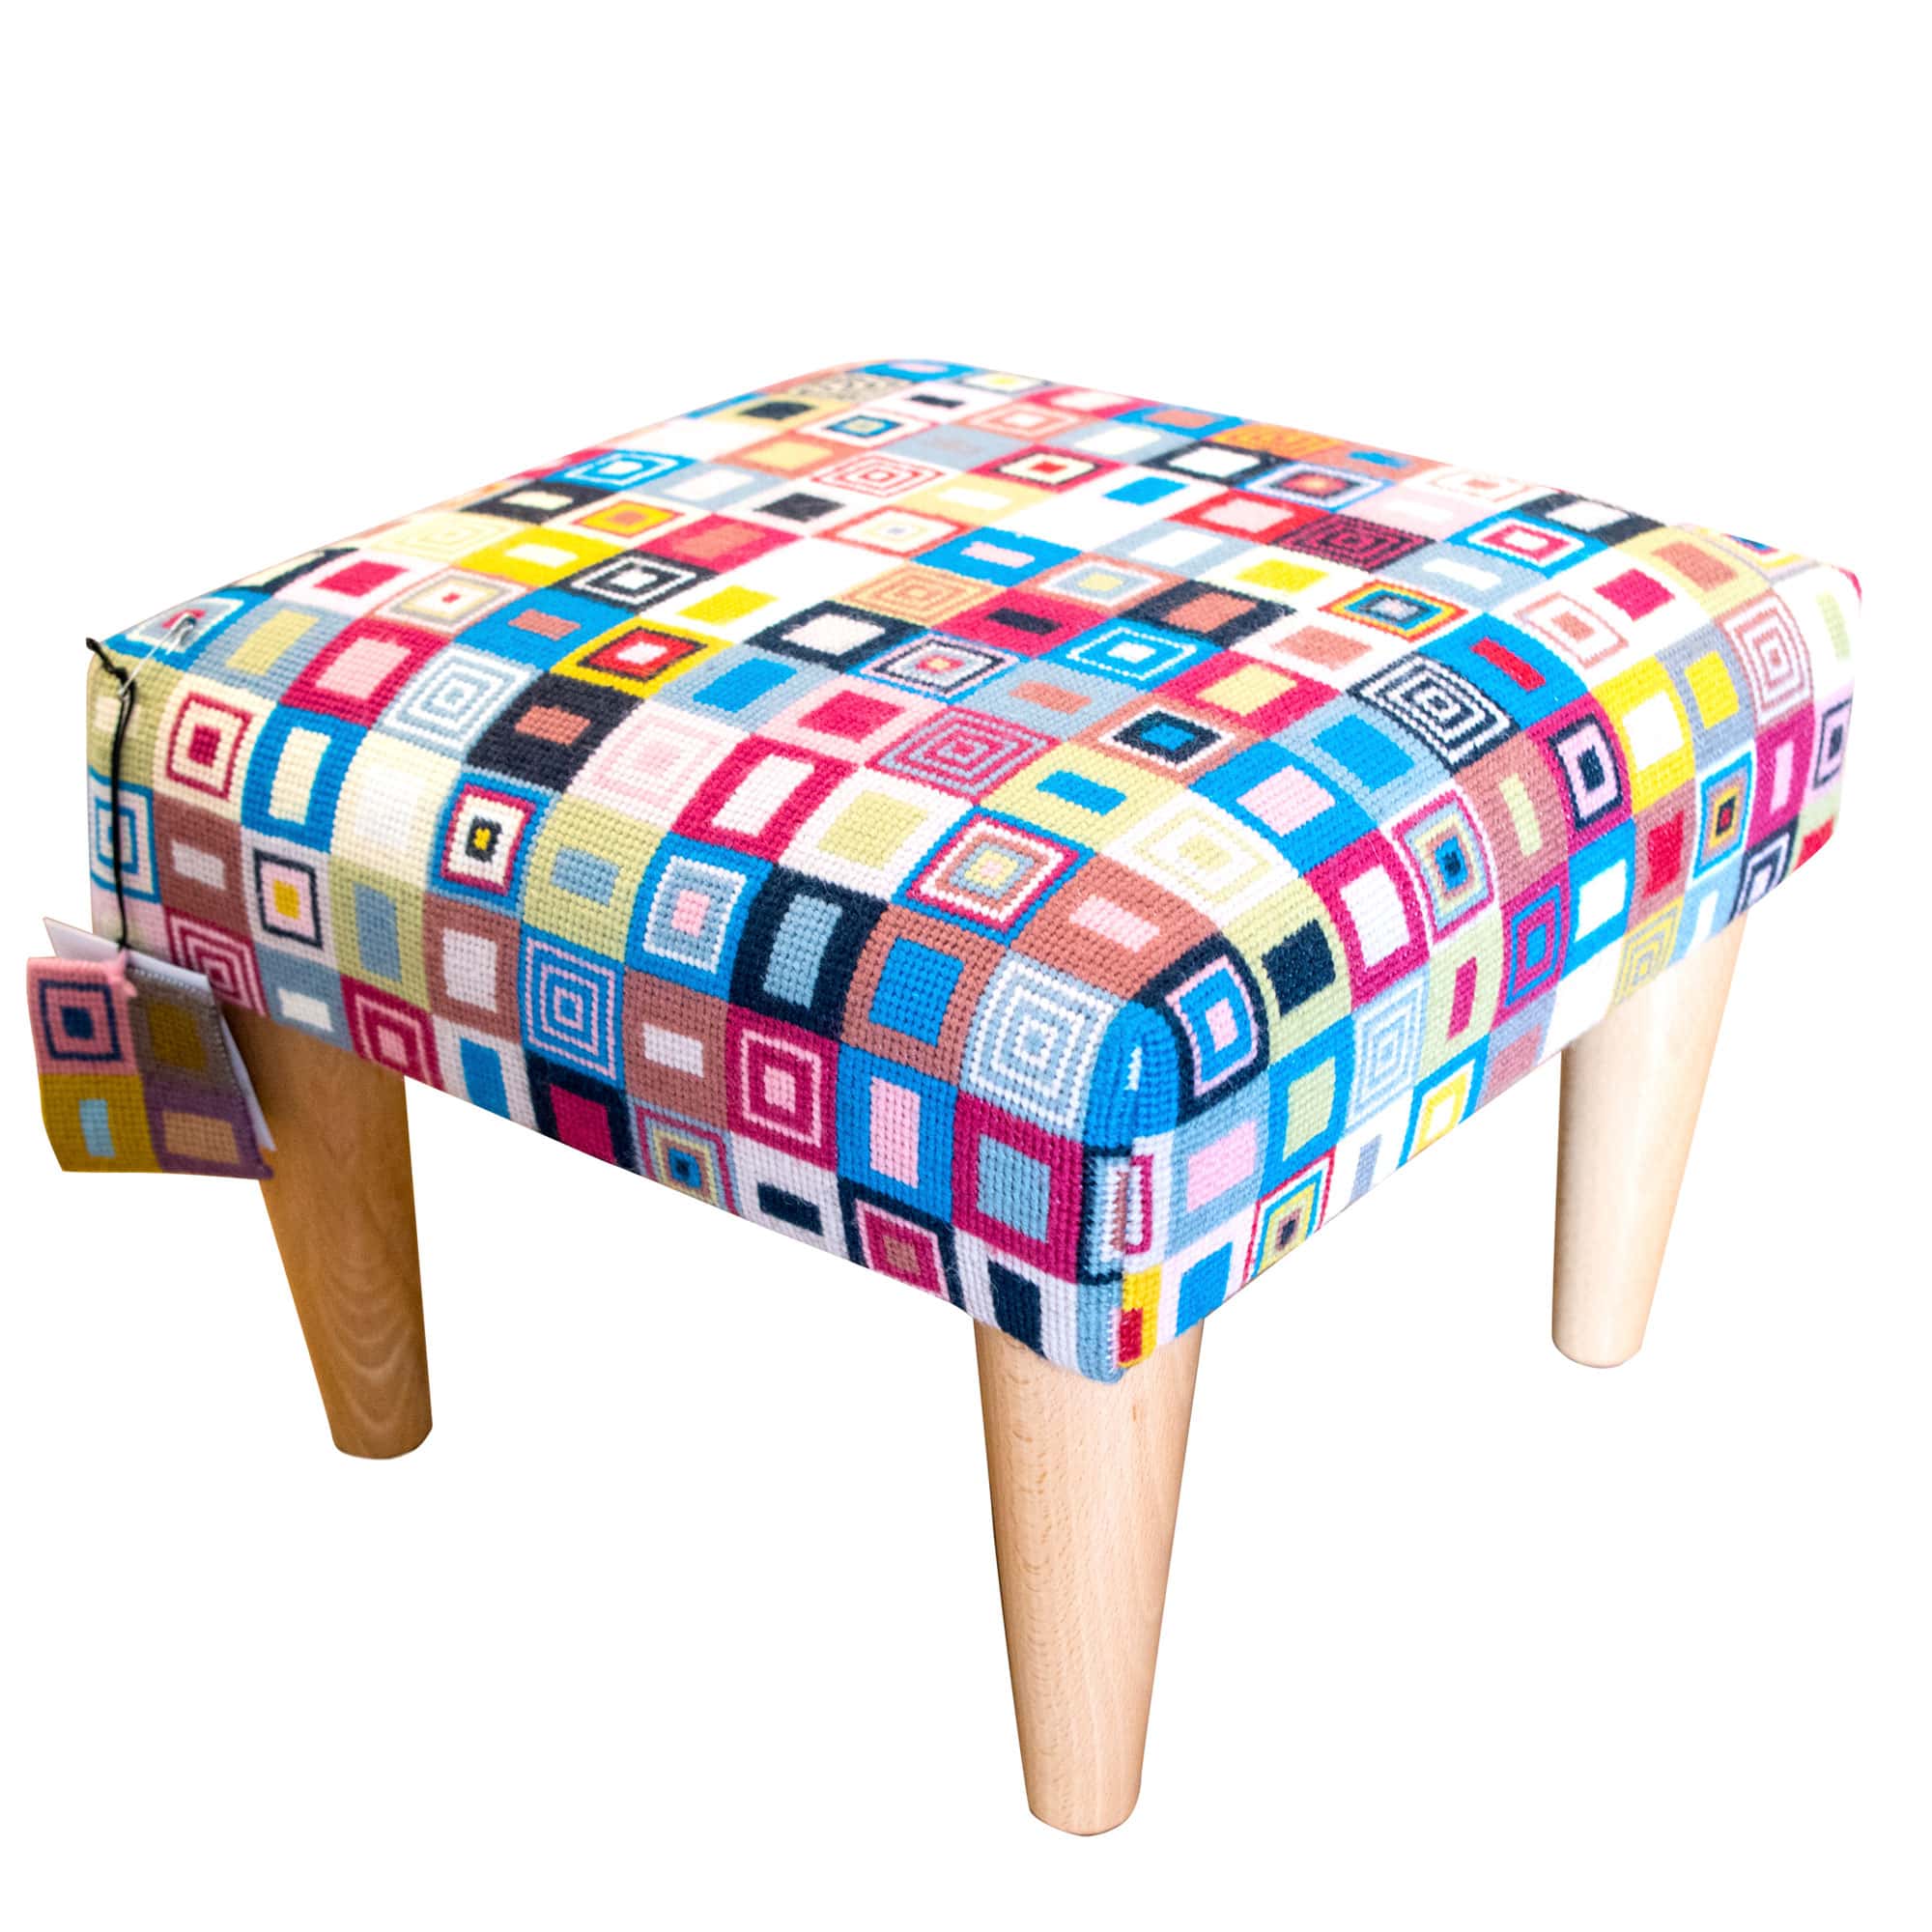 Geometric Needlepoint Footstool Hand Stitched Embroidery Fine Cell Work